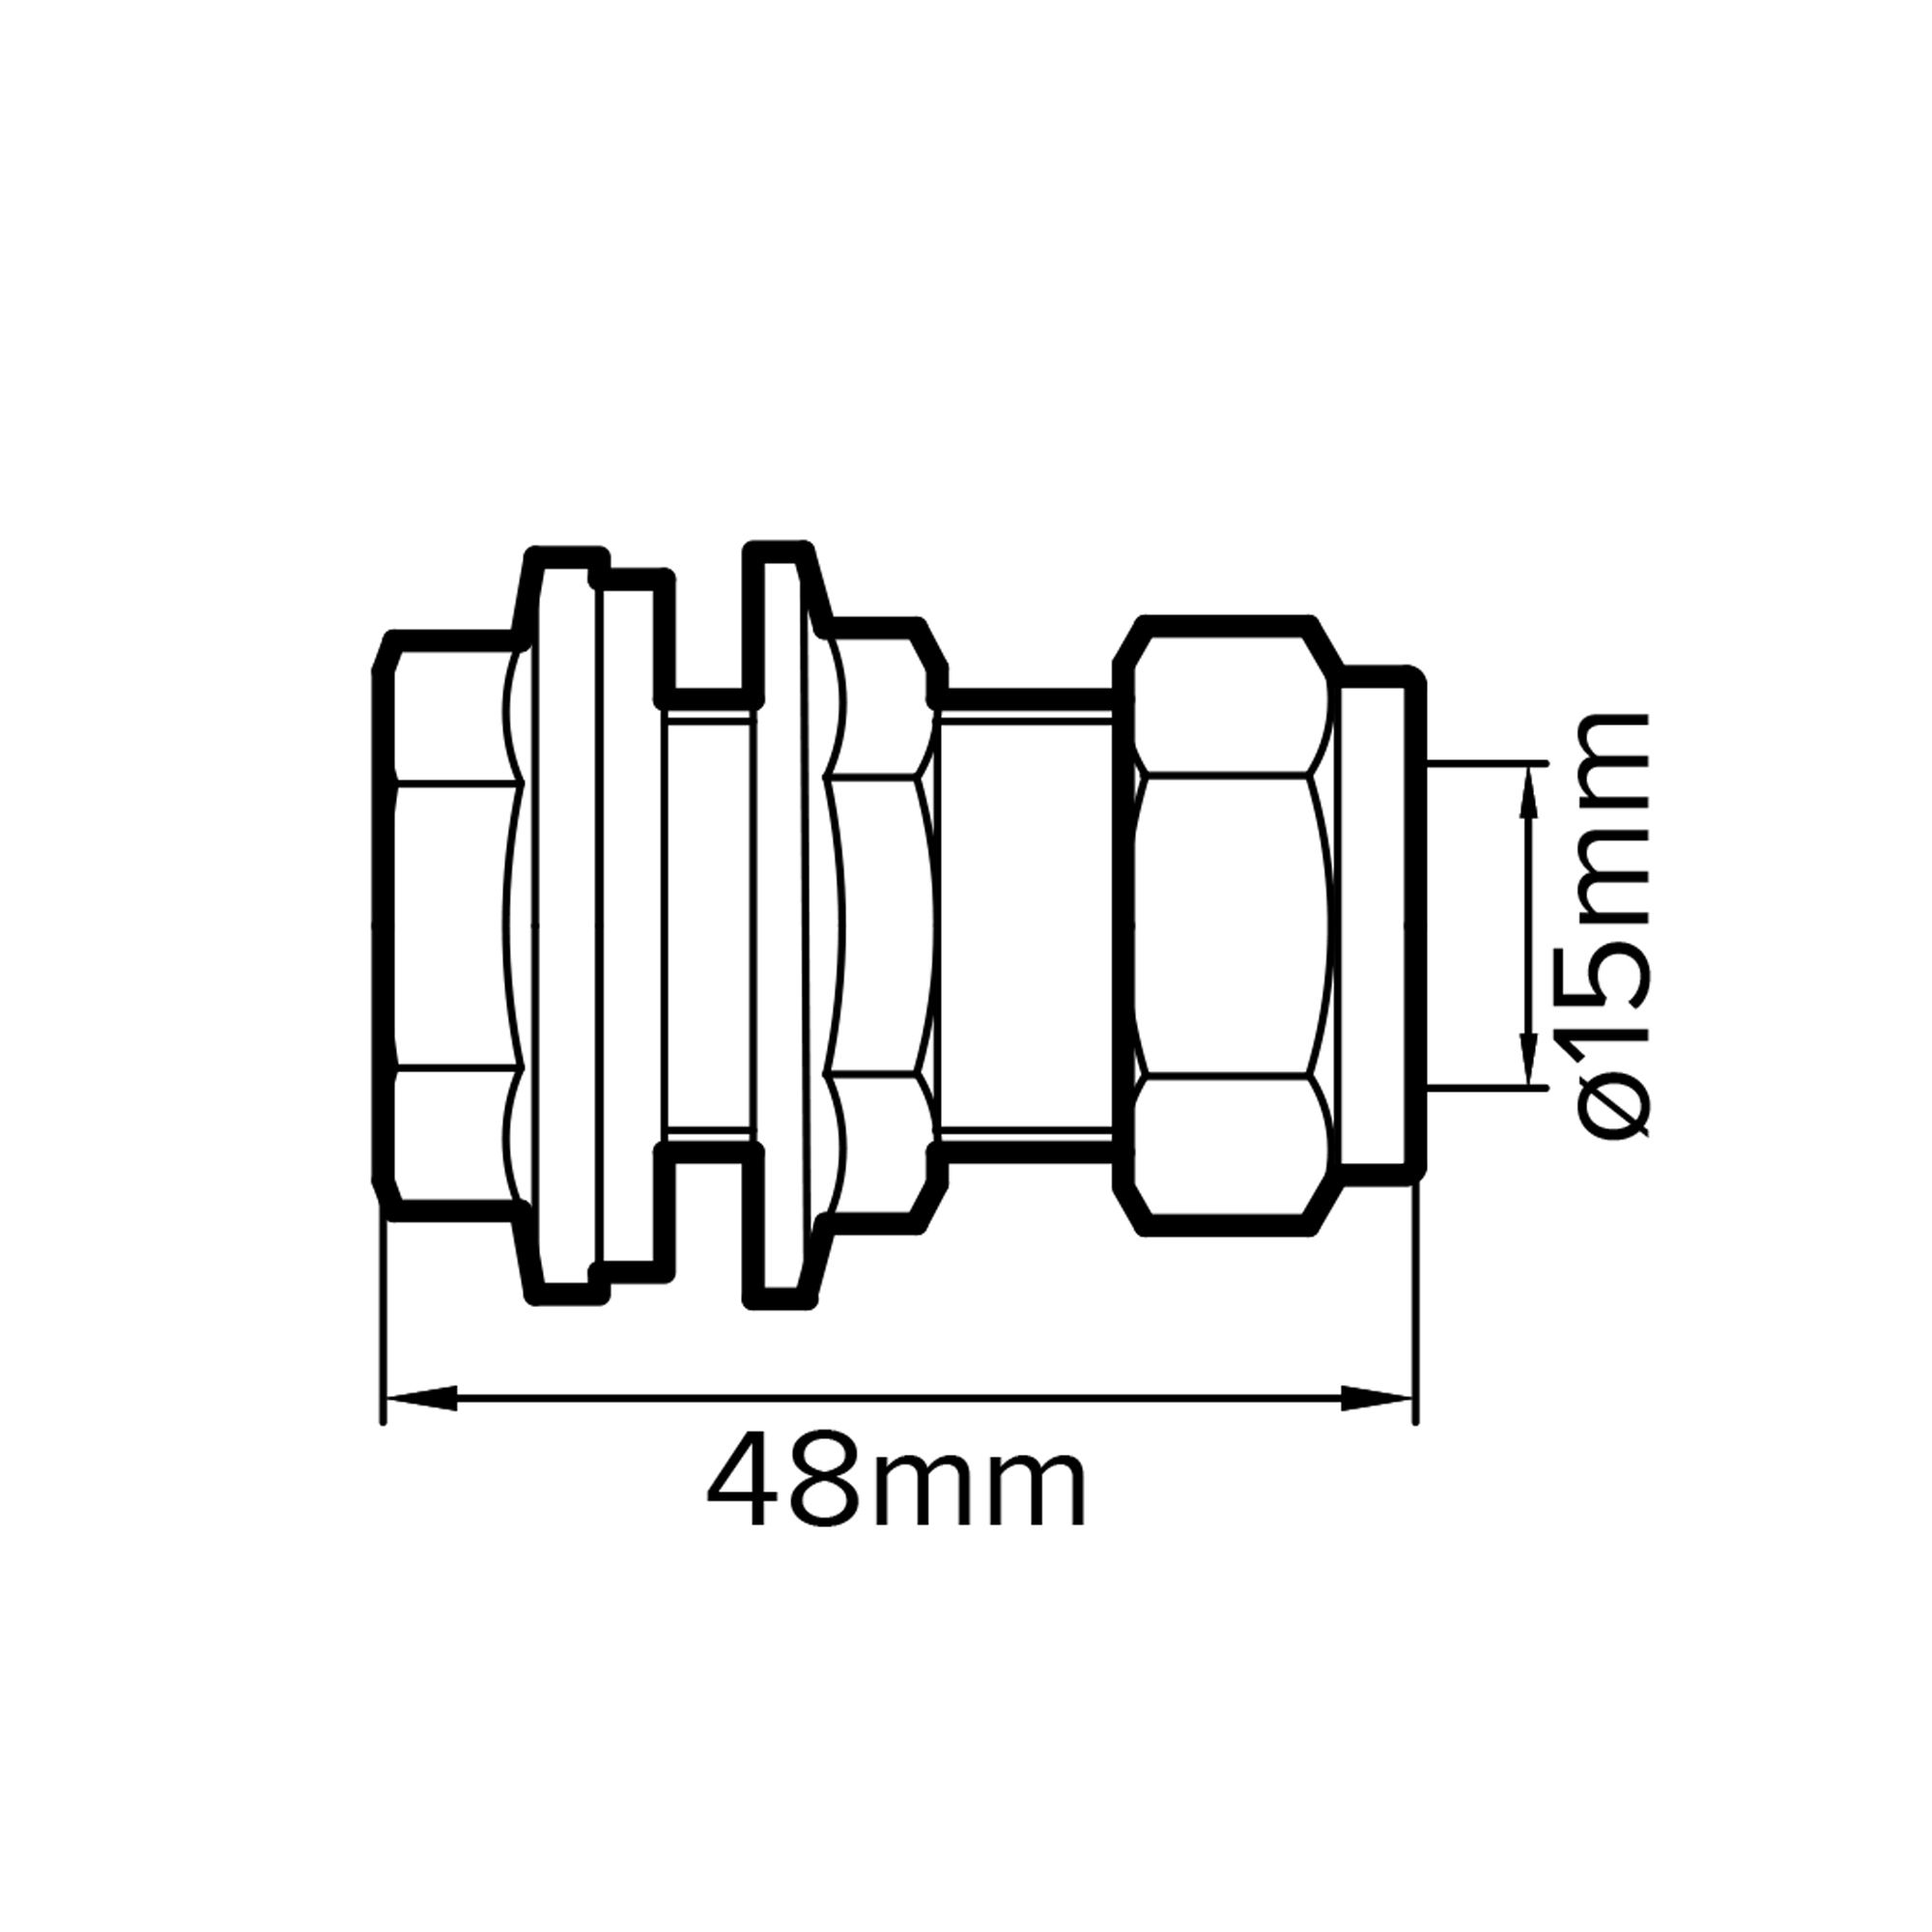 Plumbsure Compression Straight Tank connector, (Dia)15mm